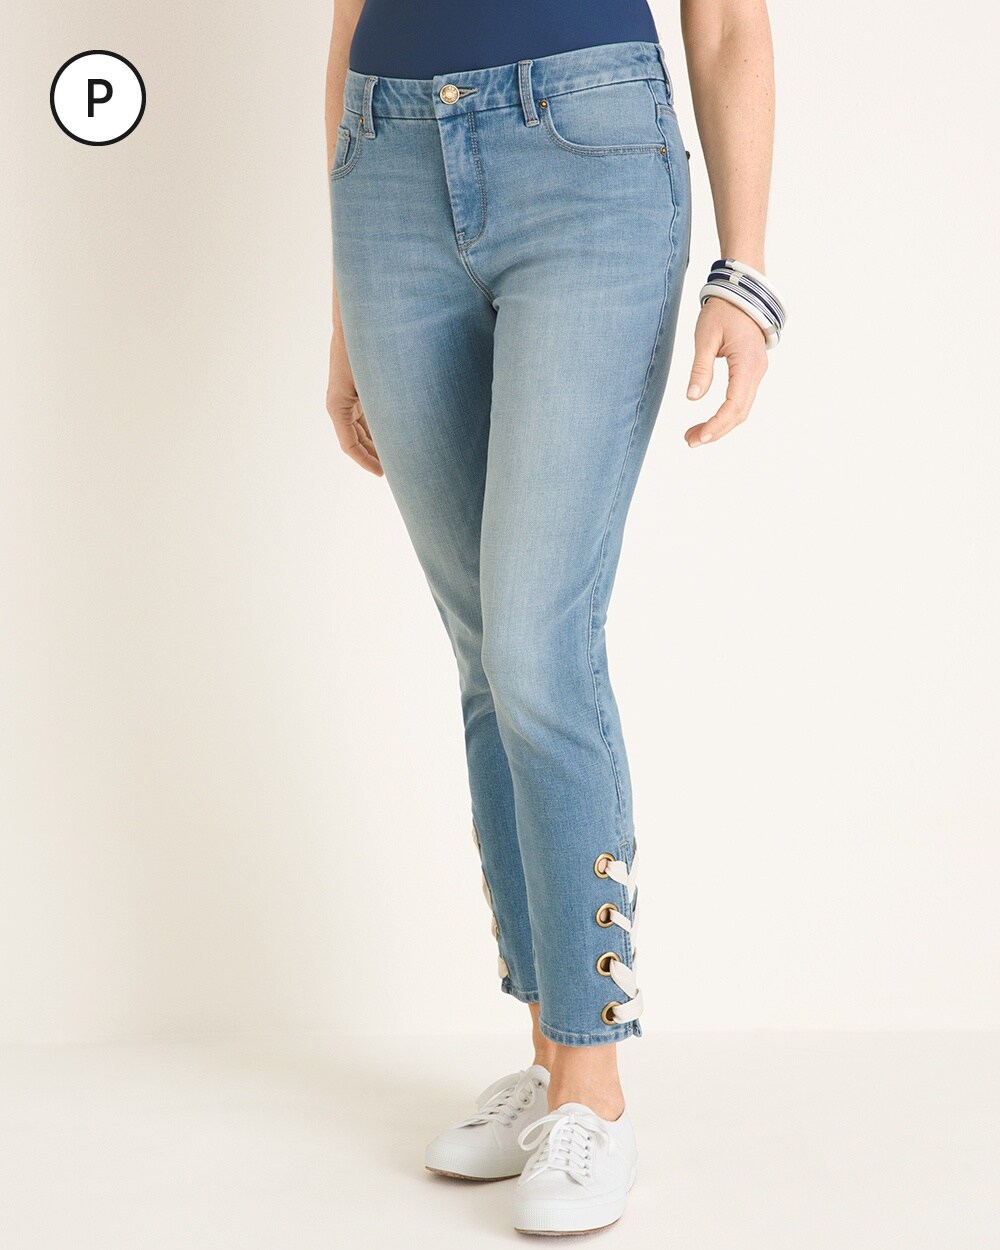 So Slimming Petite Lace-Up Hem Girlfriend Ankle Jeans